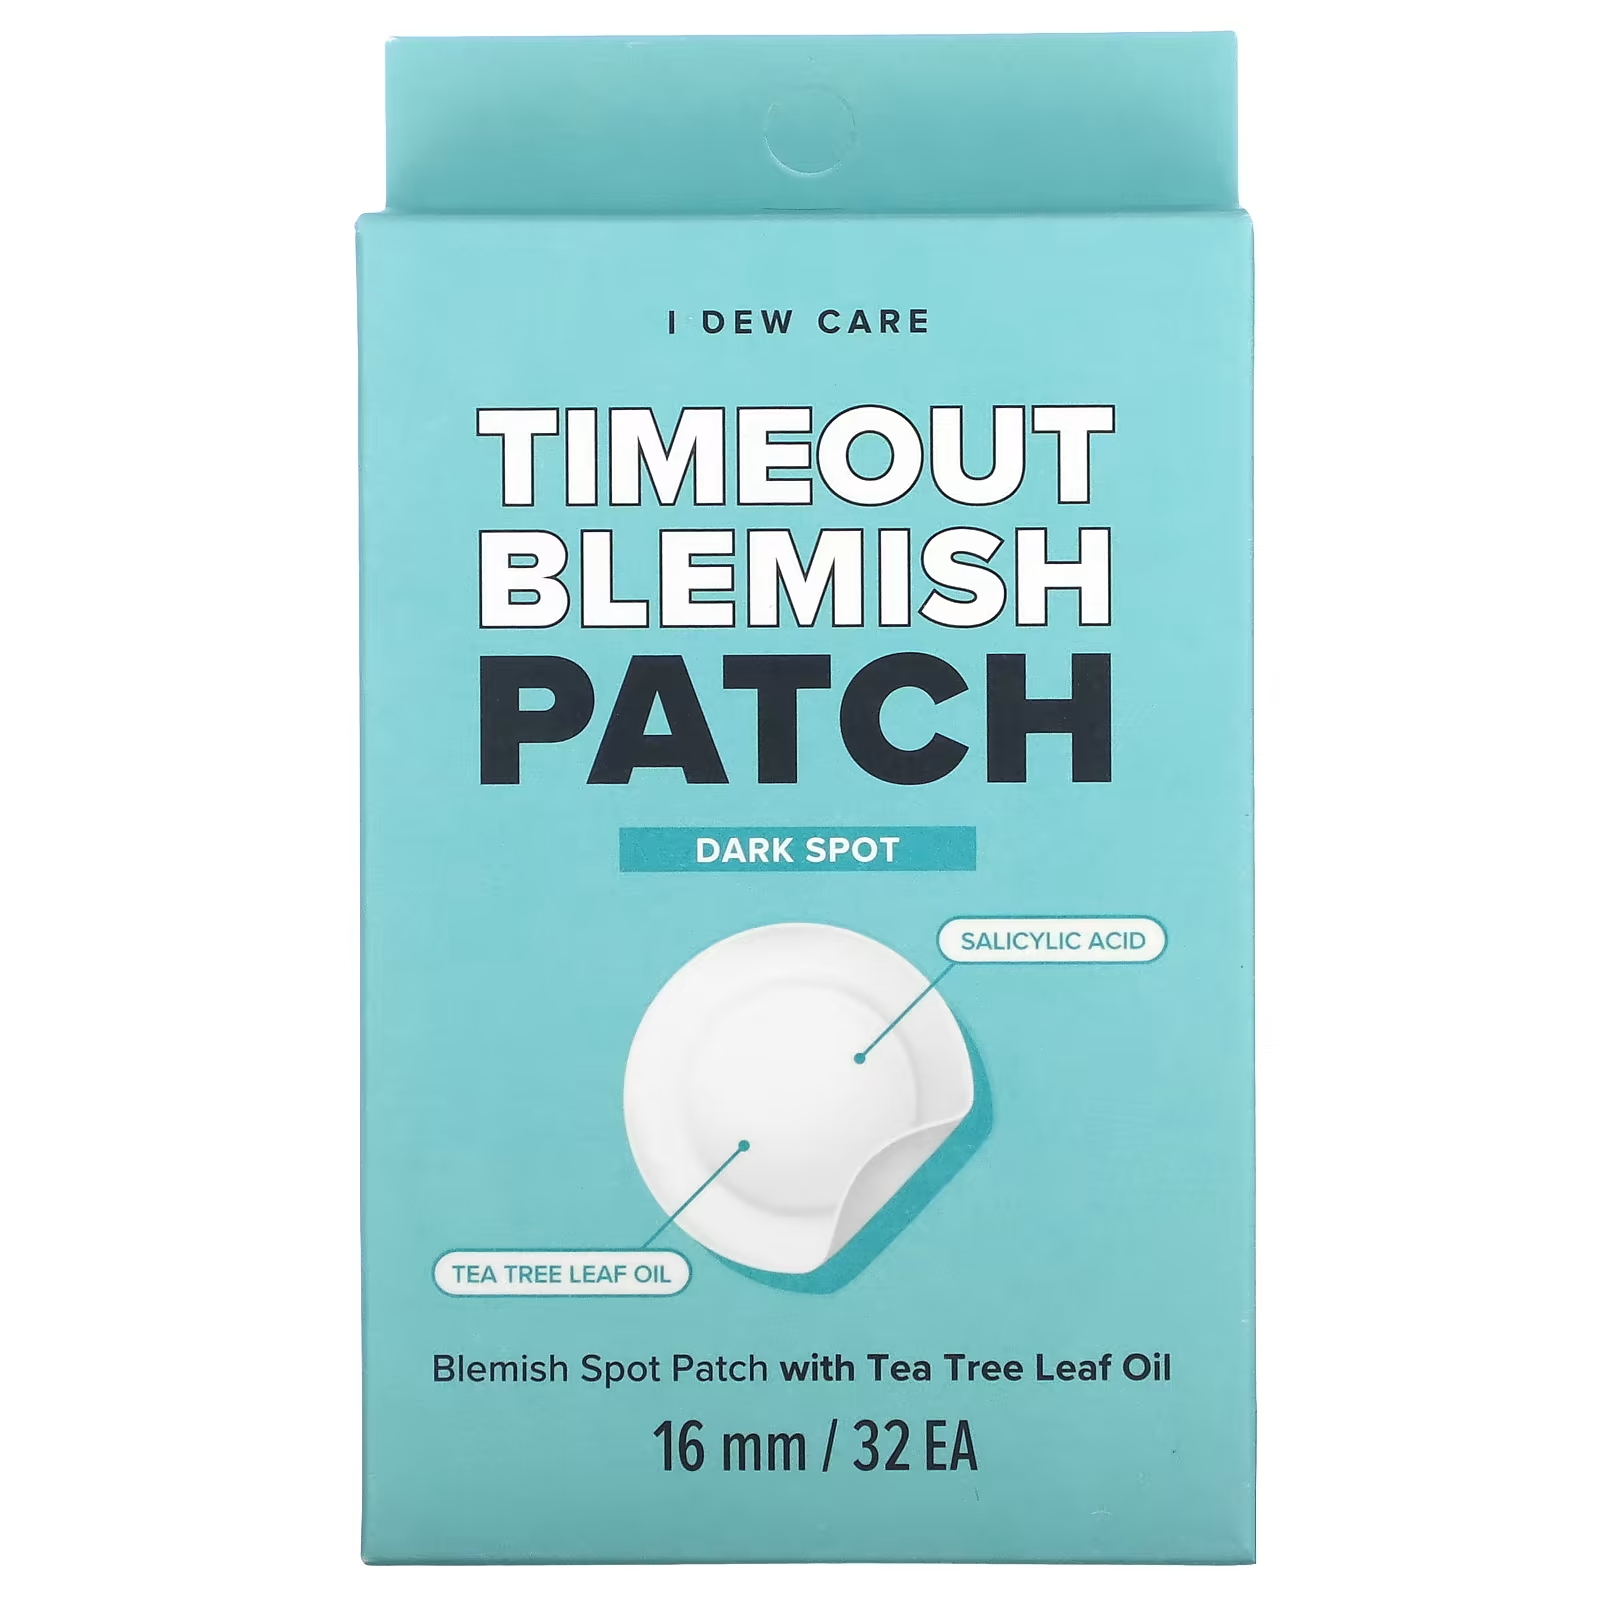 Патчи от пятен I Dew Care Timeout Blemish Patch Dark Spot, 32 патча патчи от пятен i dew care timeout blemish patch dark spot 32 патча